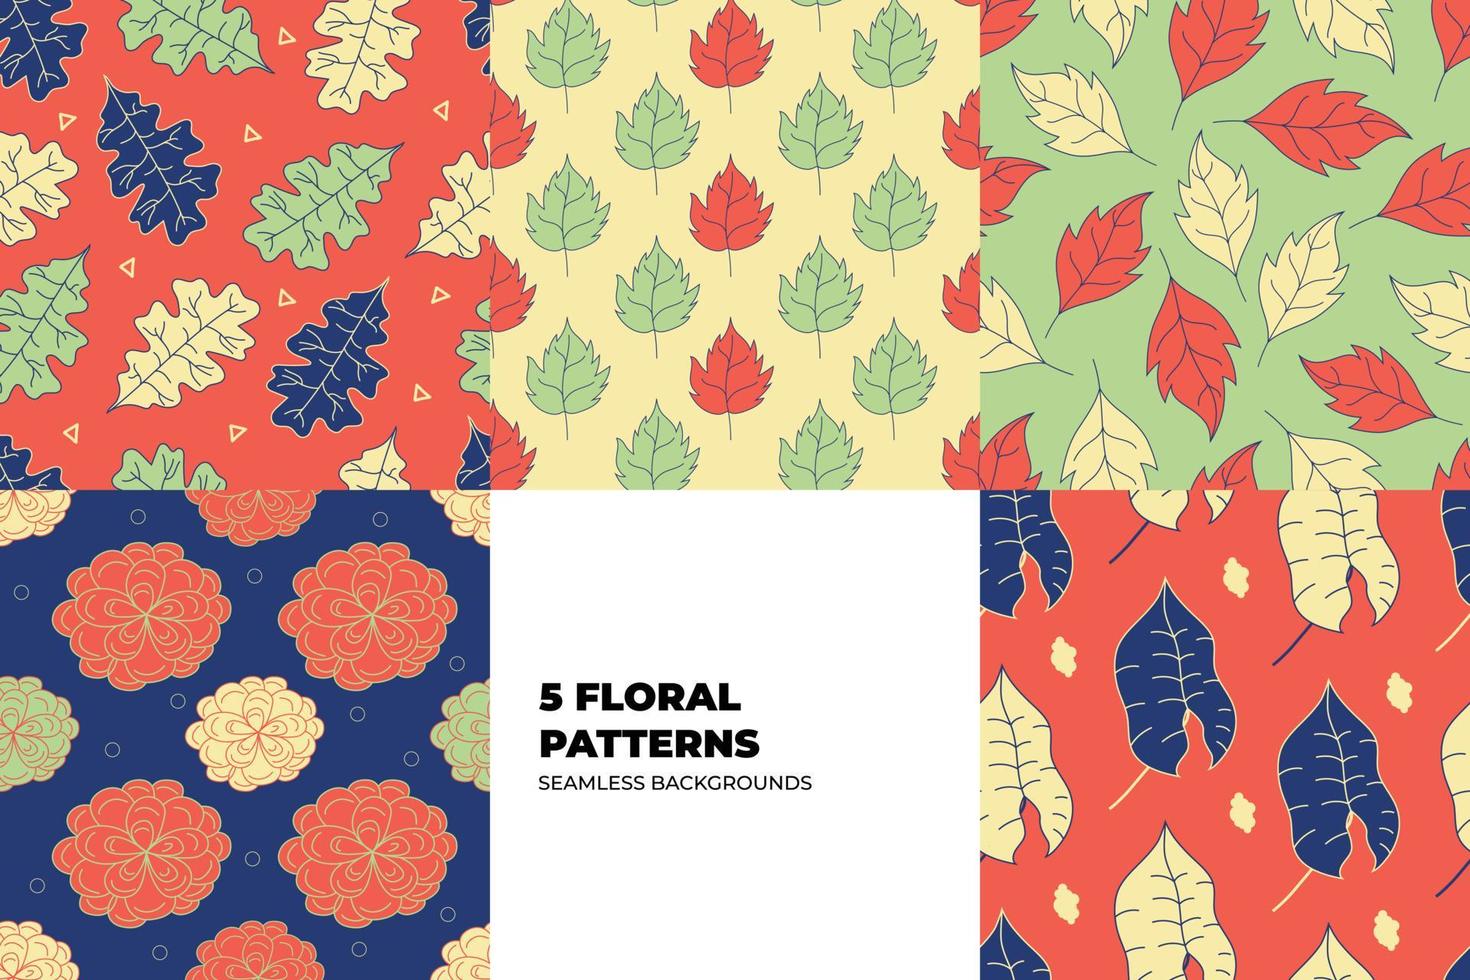 Autumn pattern set for fashion design. Seamless background with fall leaves and flowers for fabric. Floral modern vector texture. Seasonal wallpapers. Colorful illustration in flat design.